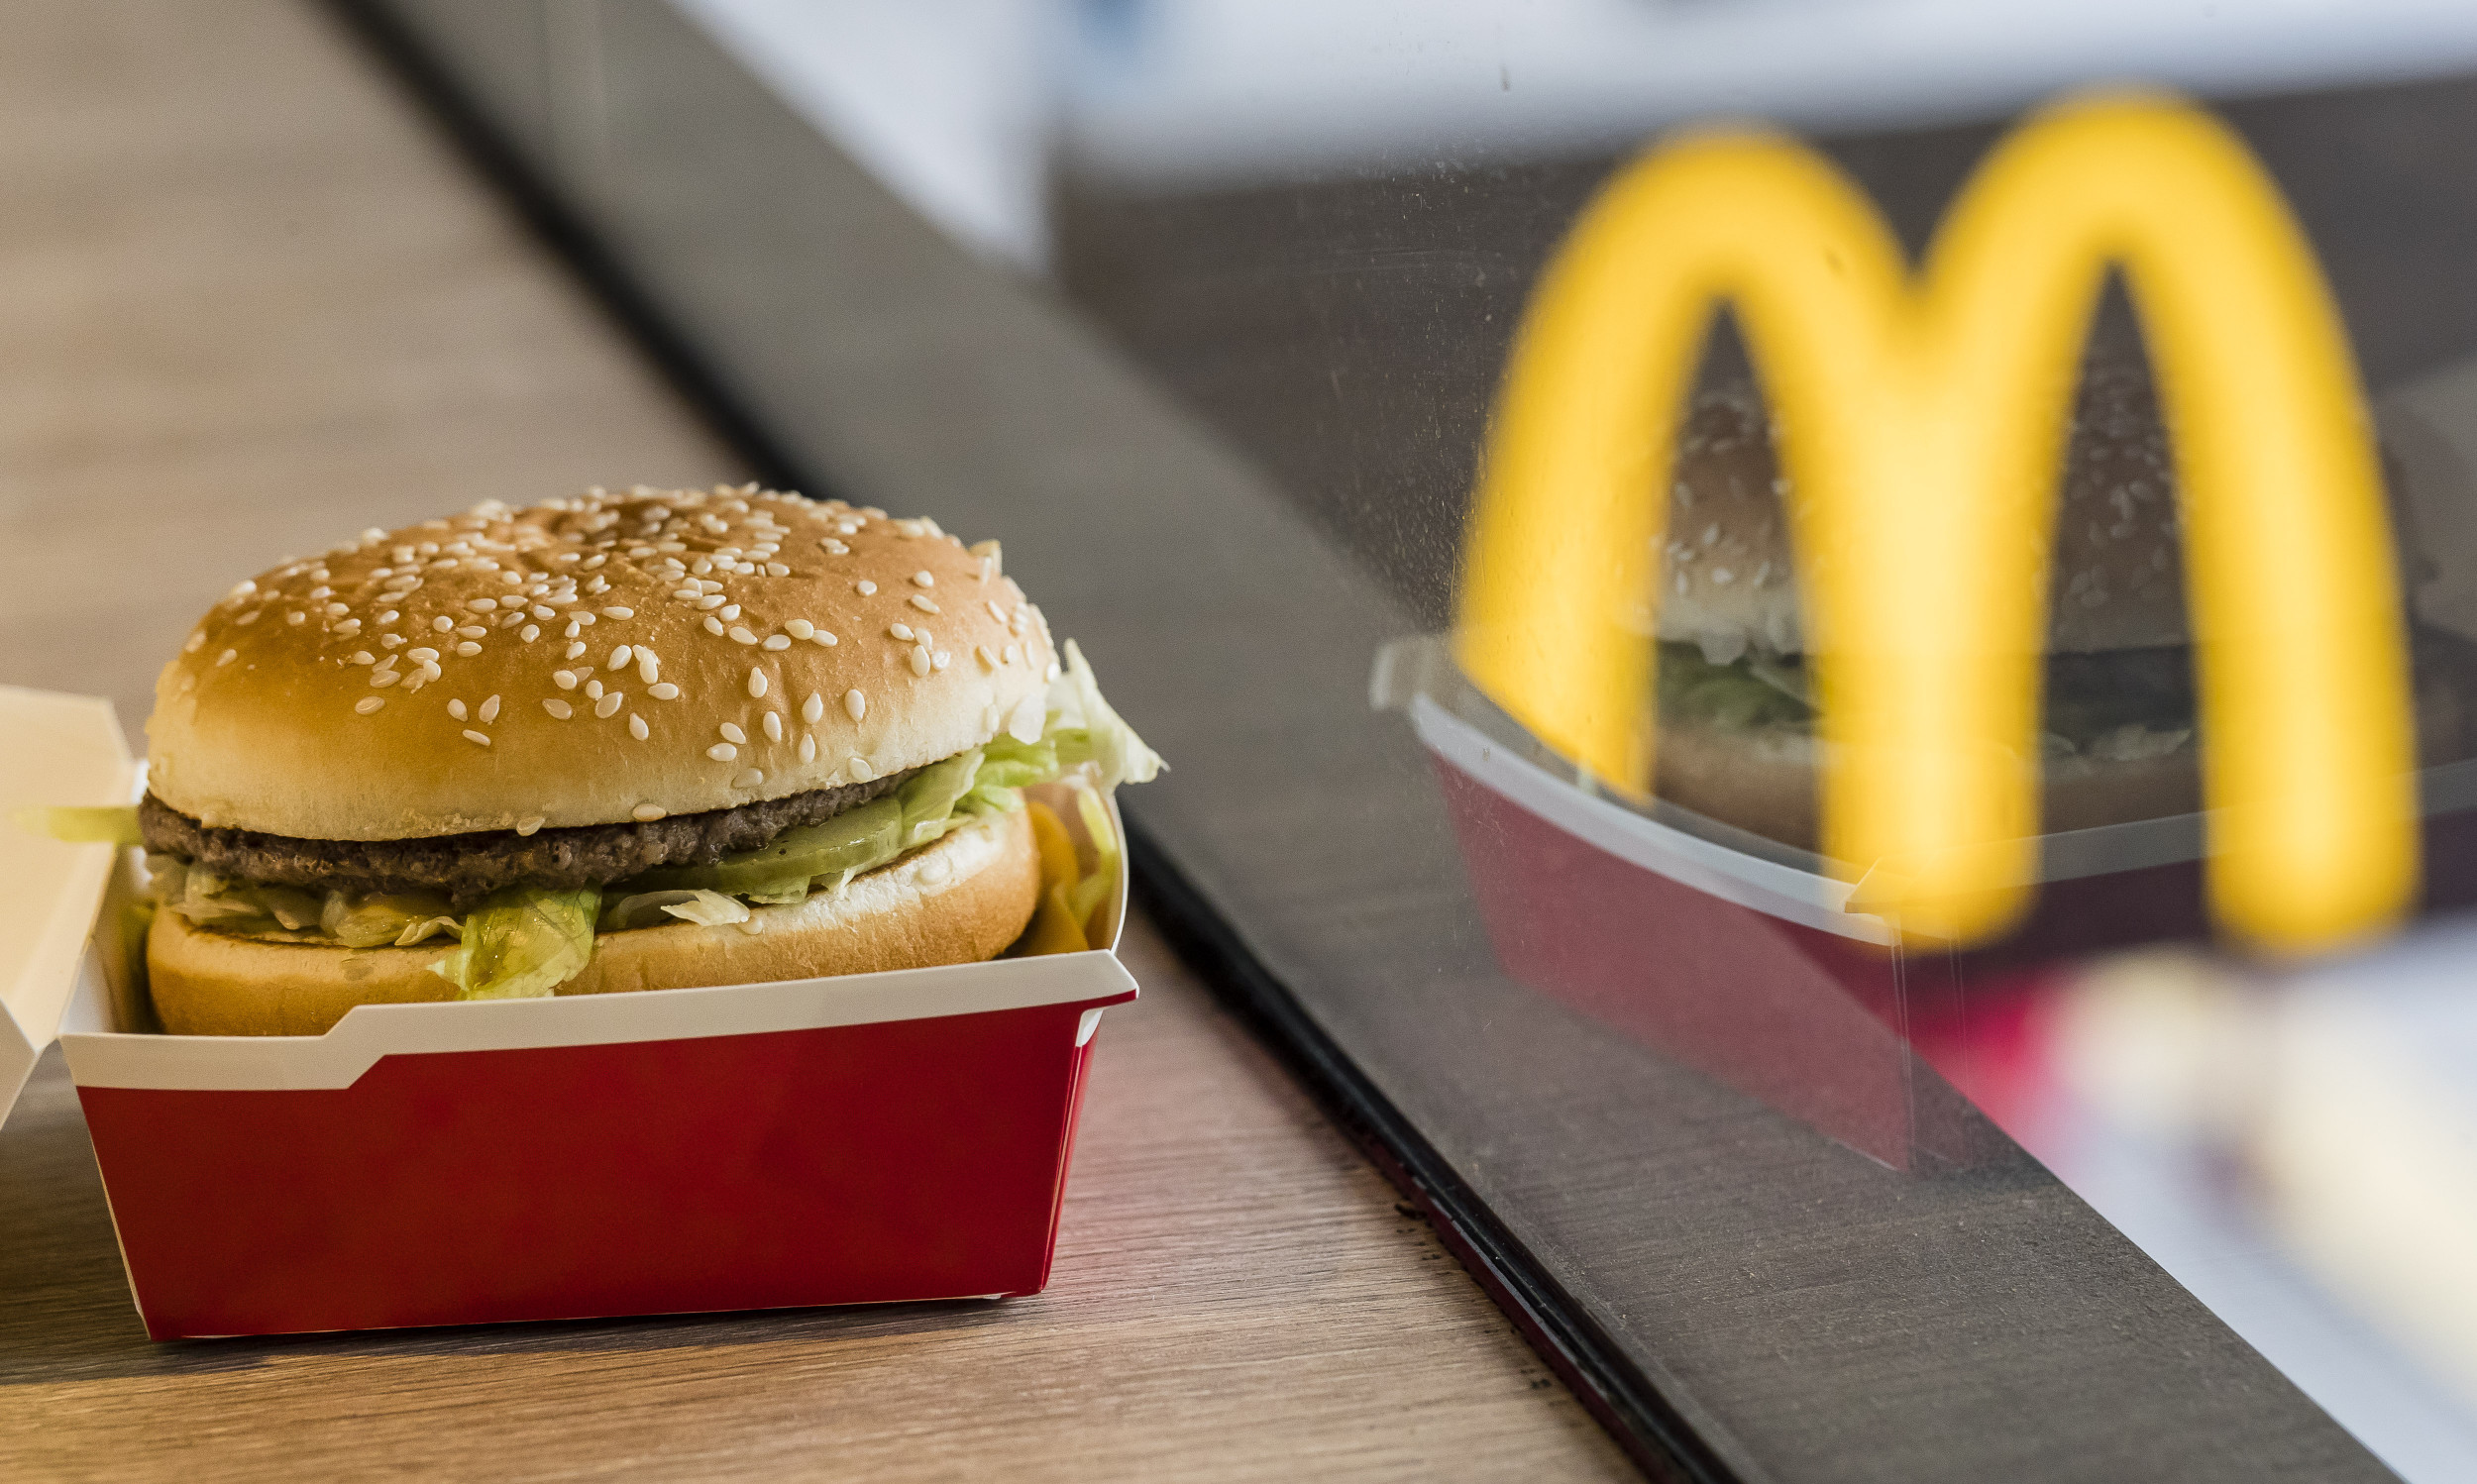 Vegetarian of 45 Years Vomits After McDonald’s ‘Veggie Burger’ Contains Chicken